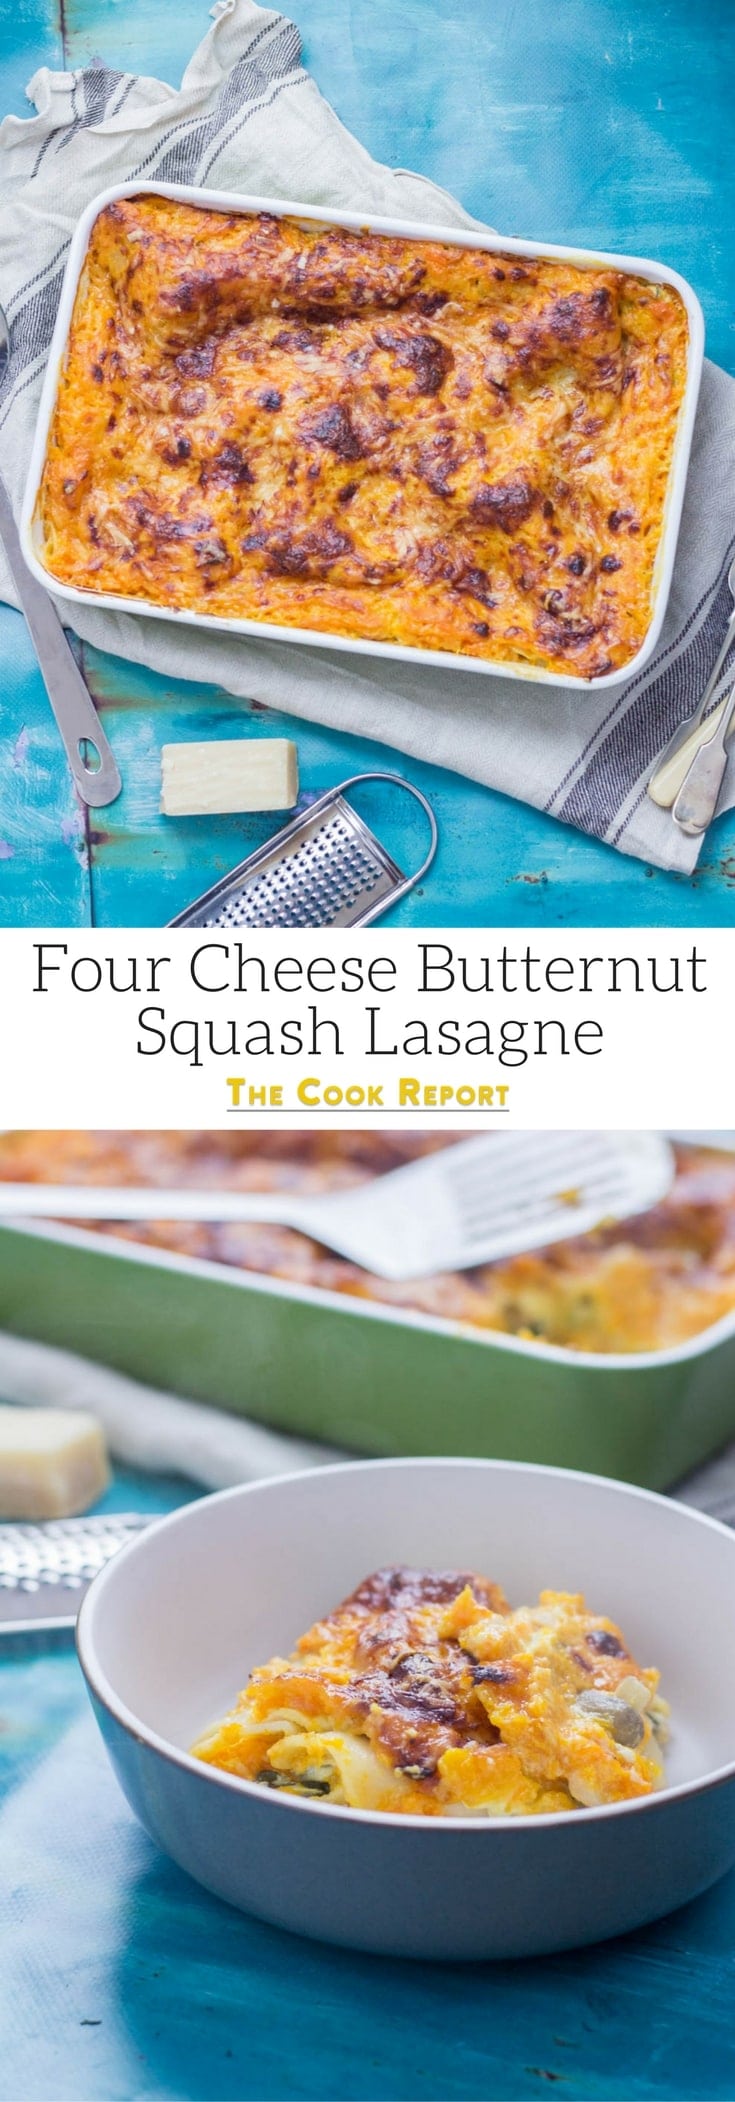 Four Cheese Butternut Squash Lasagne. This vegetarian twist on a classic pasta dish is the perfect comfort food! This four cheese butternut squash lasagne is layered with spinach and mushrooms. #lasagne #lasagna #squash #pasta #dinner